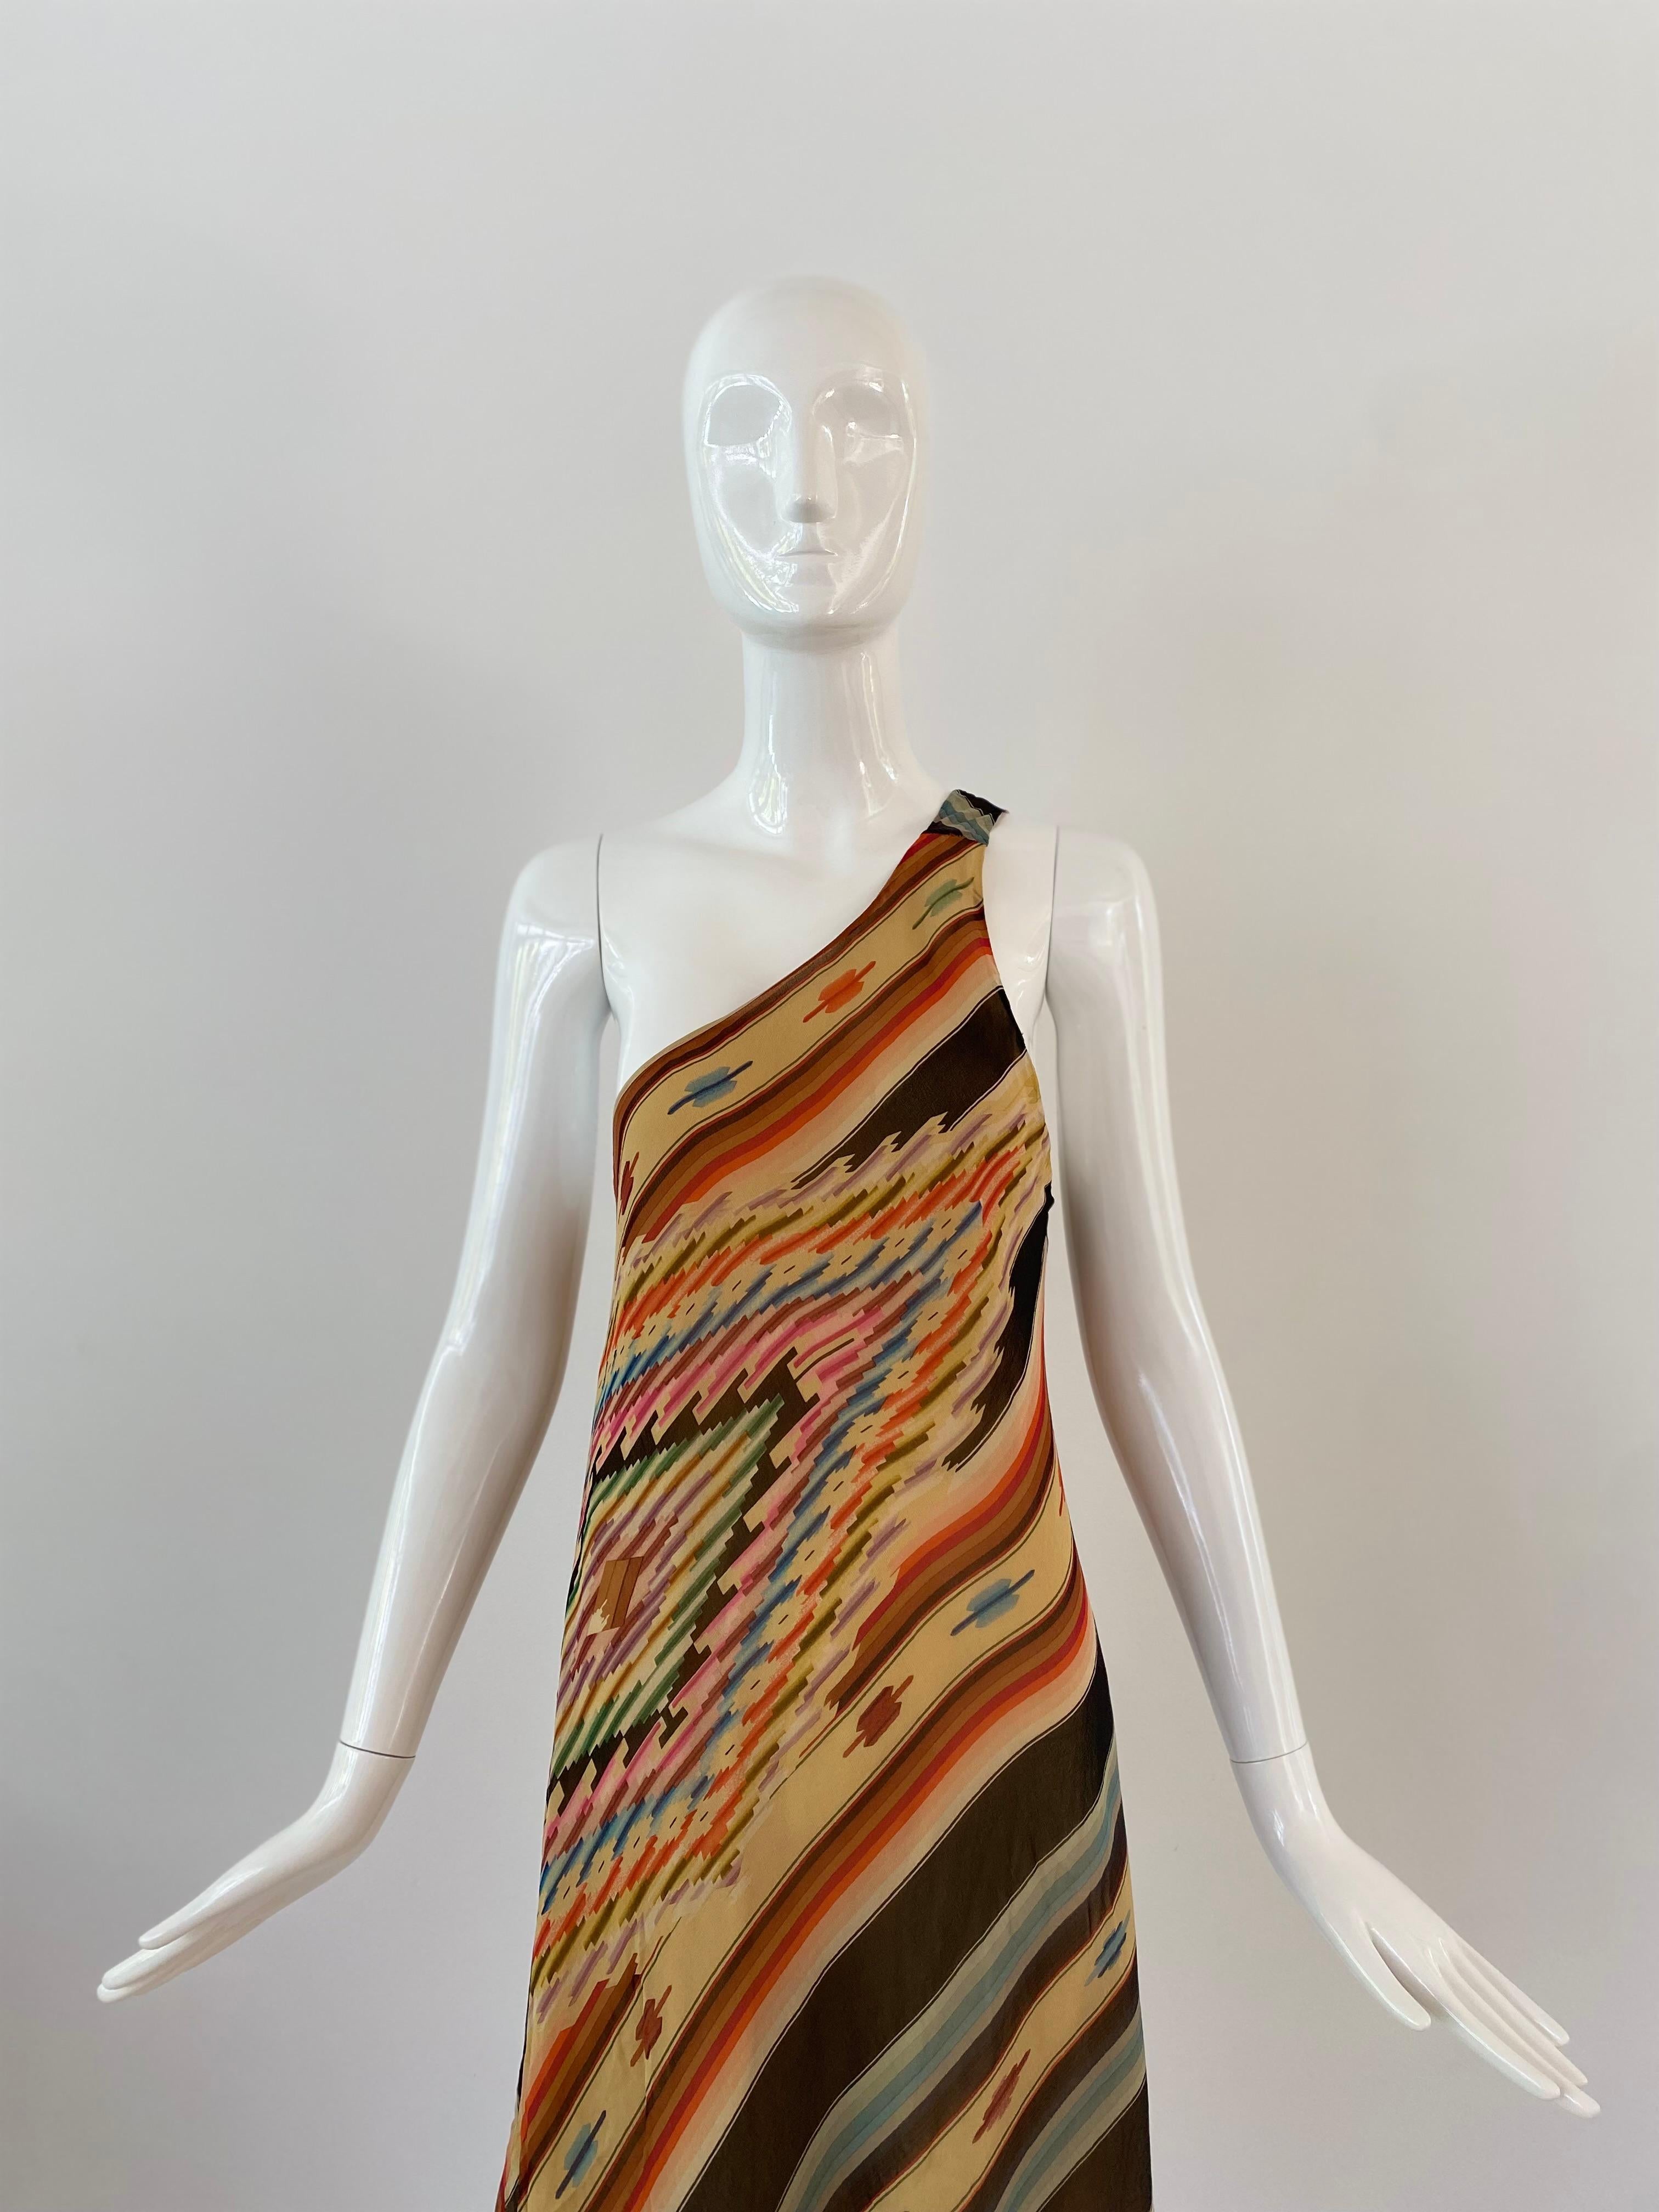 Ralph Lauren Y2K colorful asymmetric dress in their recognizable Southwestern lined print. Done in a soft chiffon silk and lined with a nude silk layer.     Marked as a US size 6, the dress hangs from one shoulder and falls asymmetrically.  This